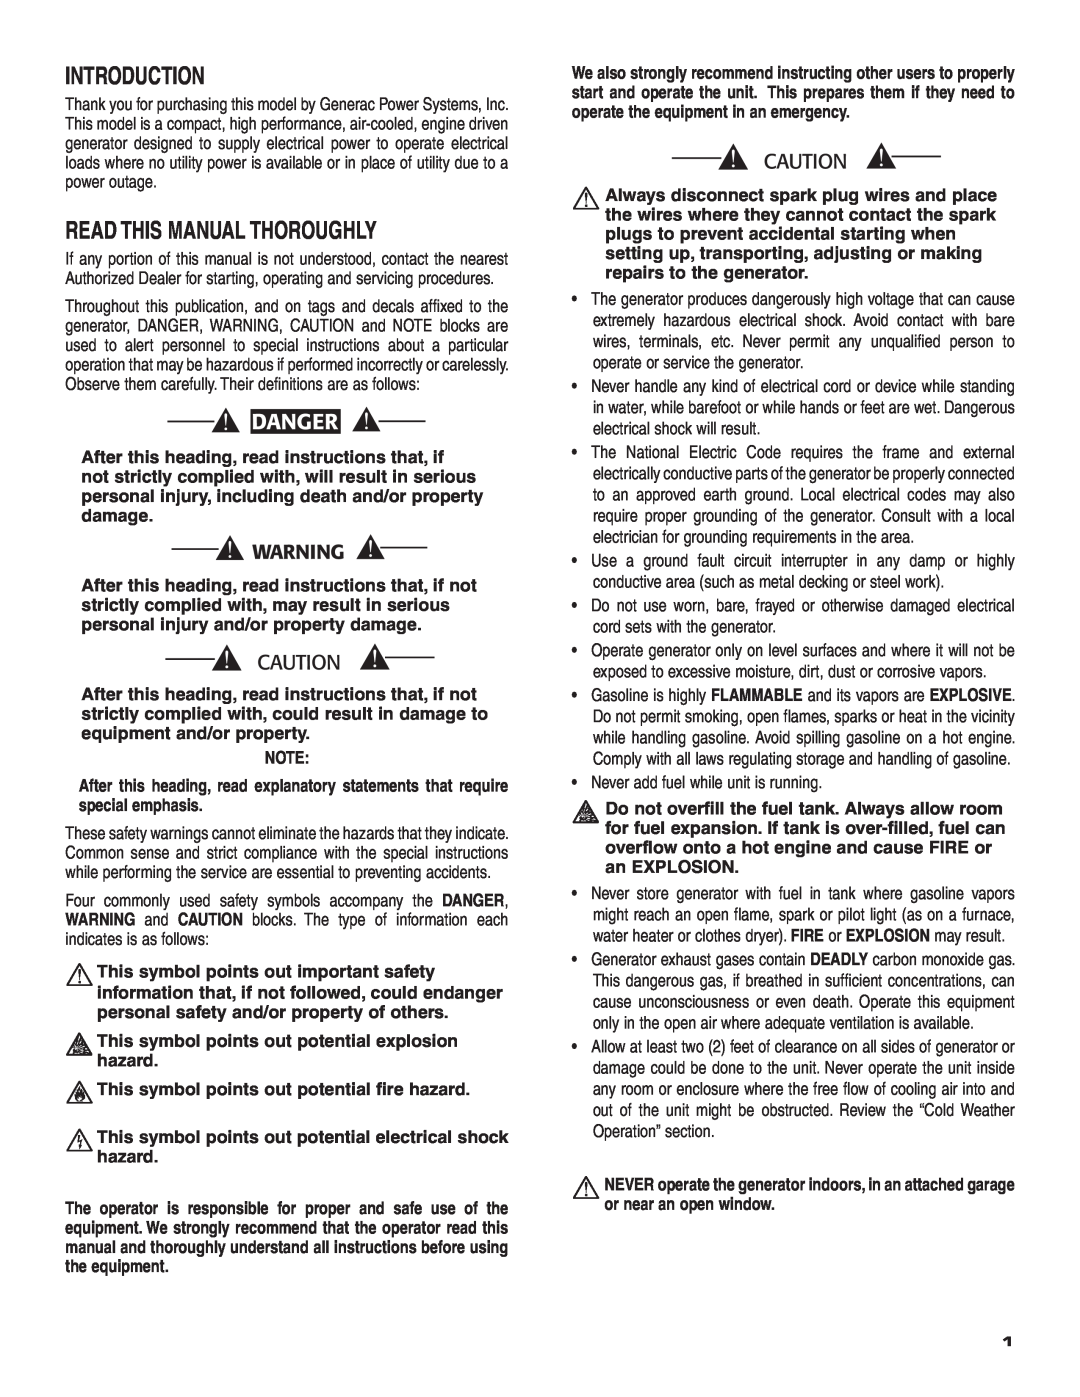 Guardian Technologies 004582-2 owner manual Introduction, Read This Manual Thoroughly, Danger 